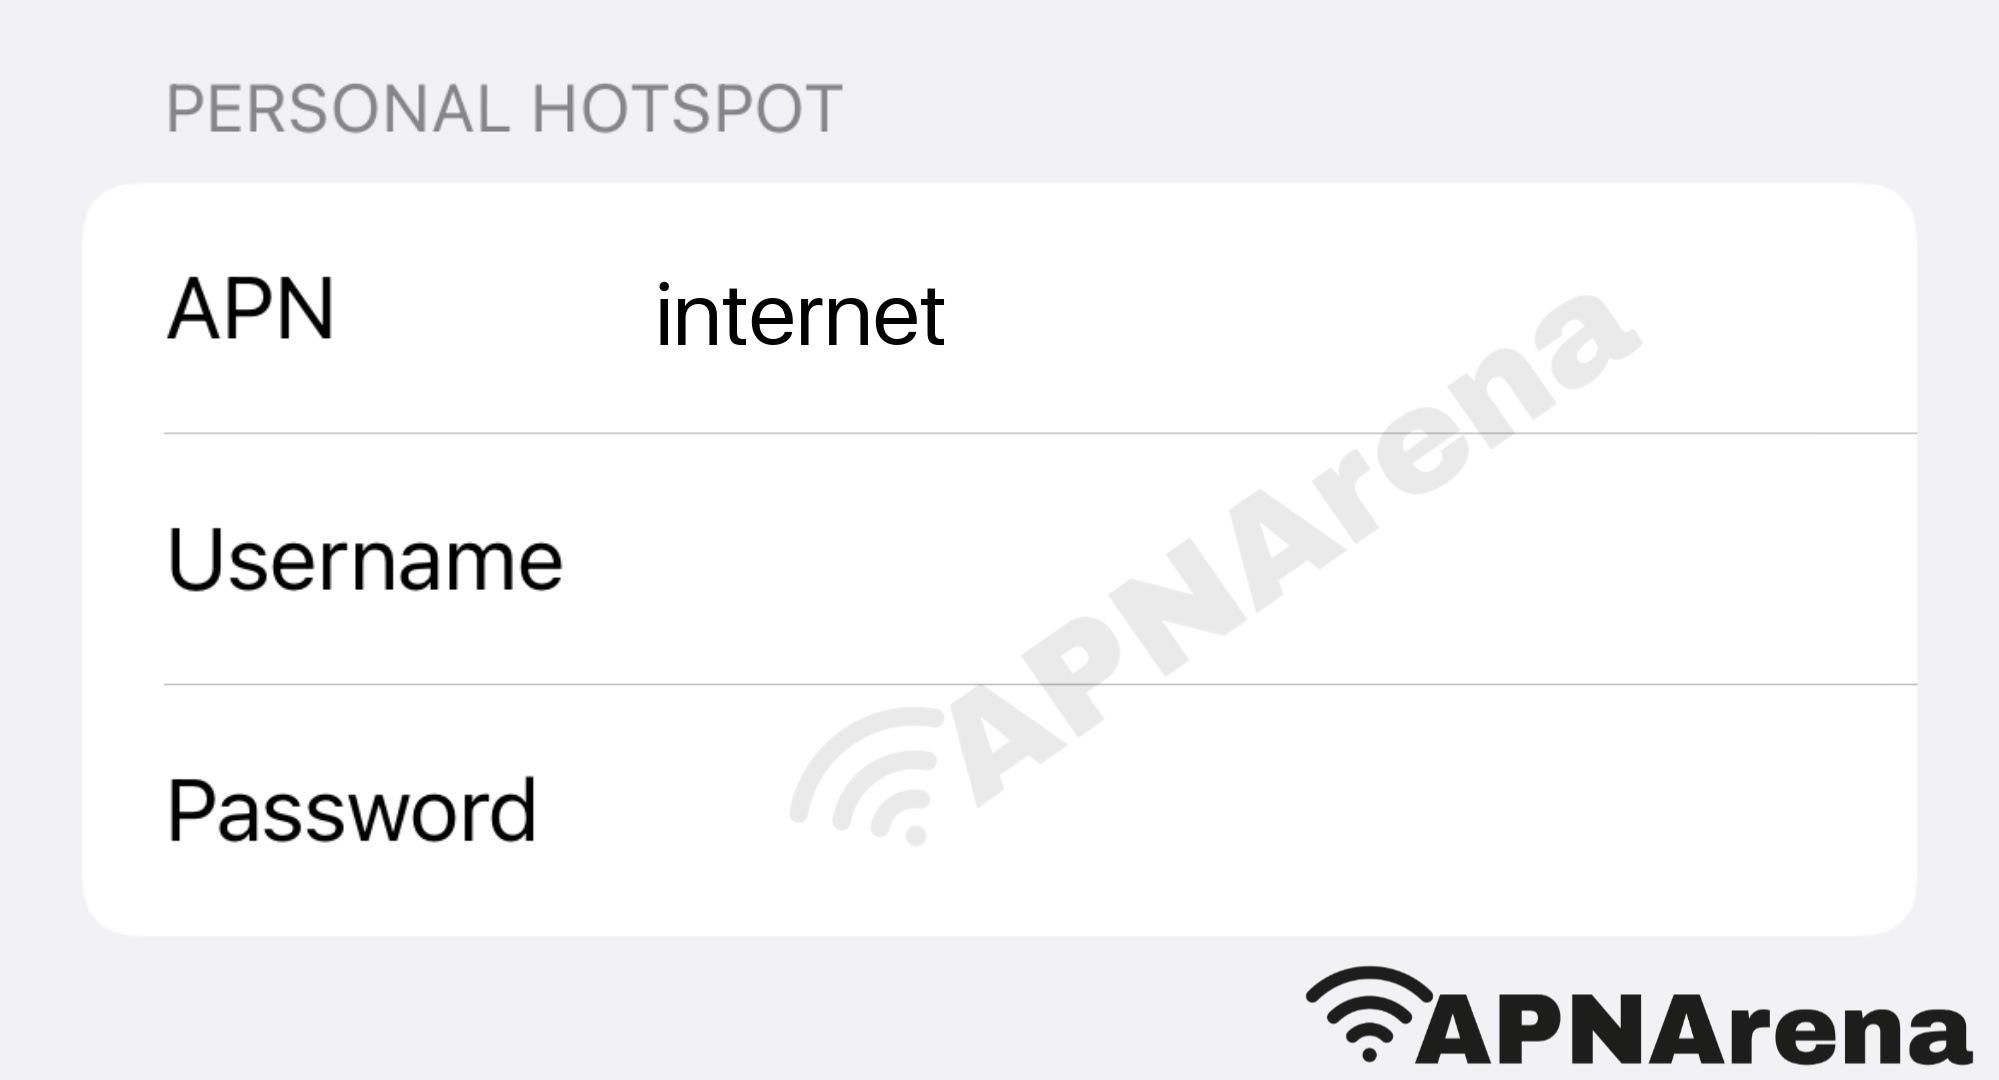 Five Mobile Personal Hotspot Settings for iPhone